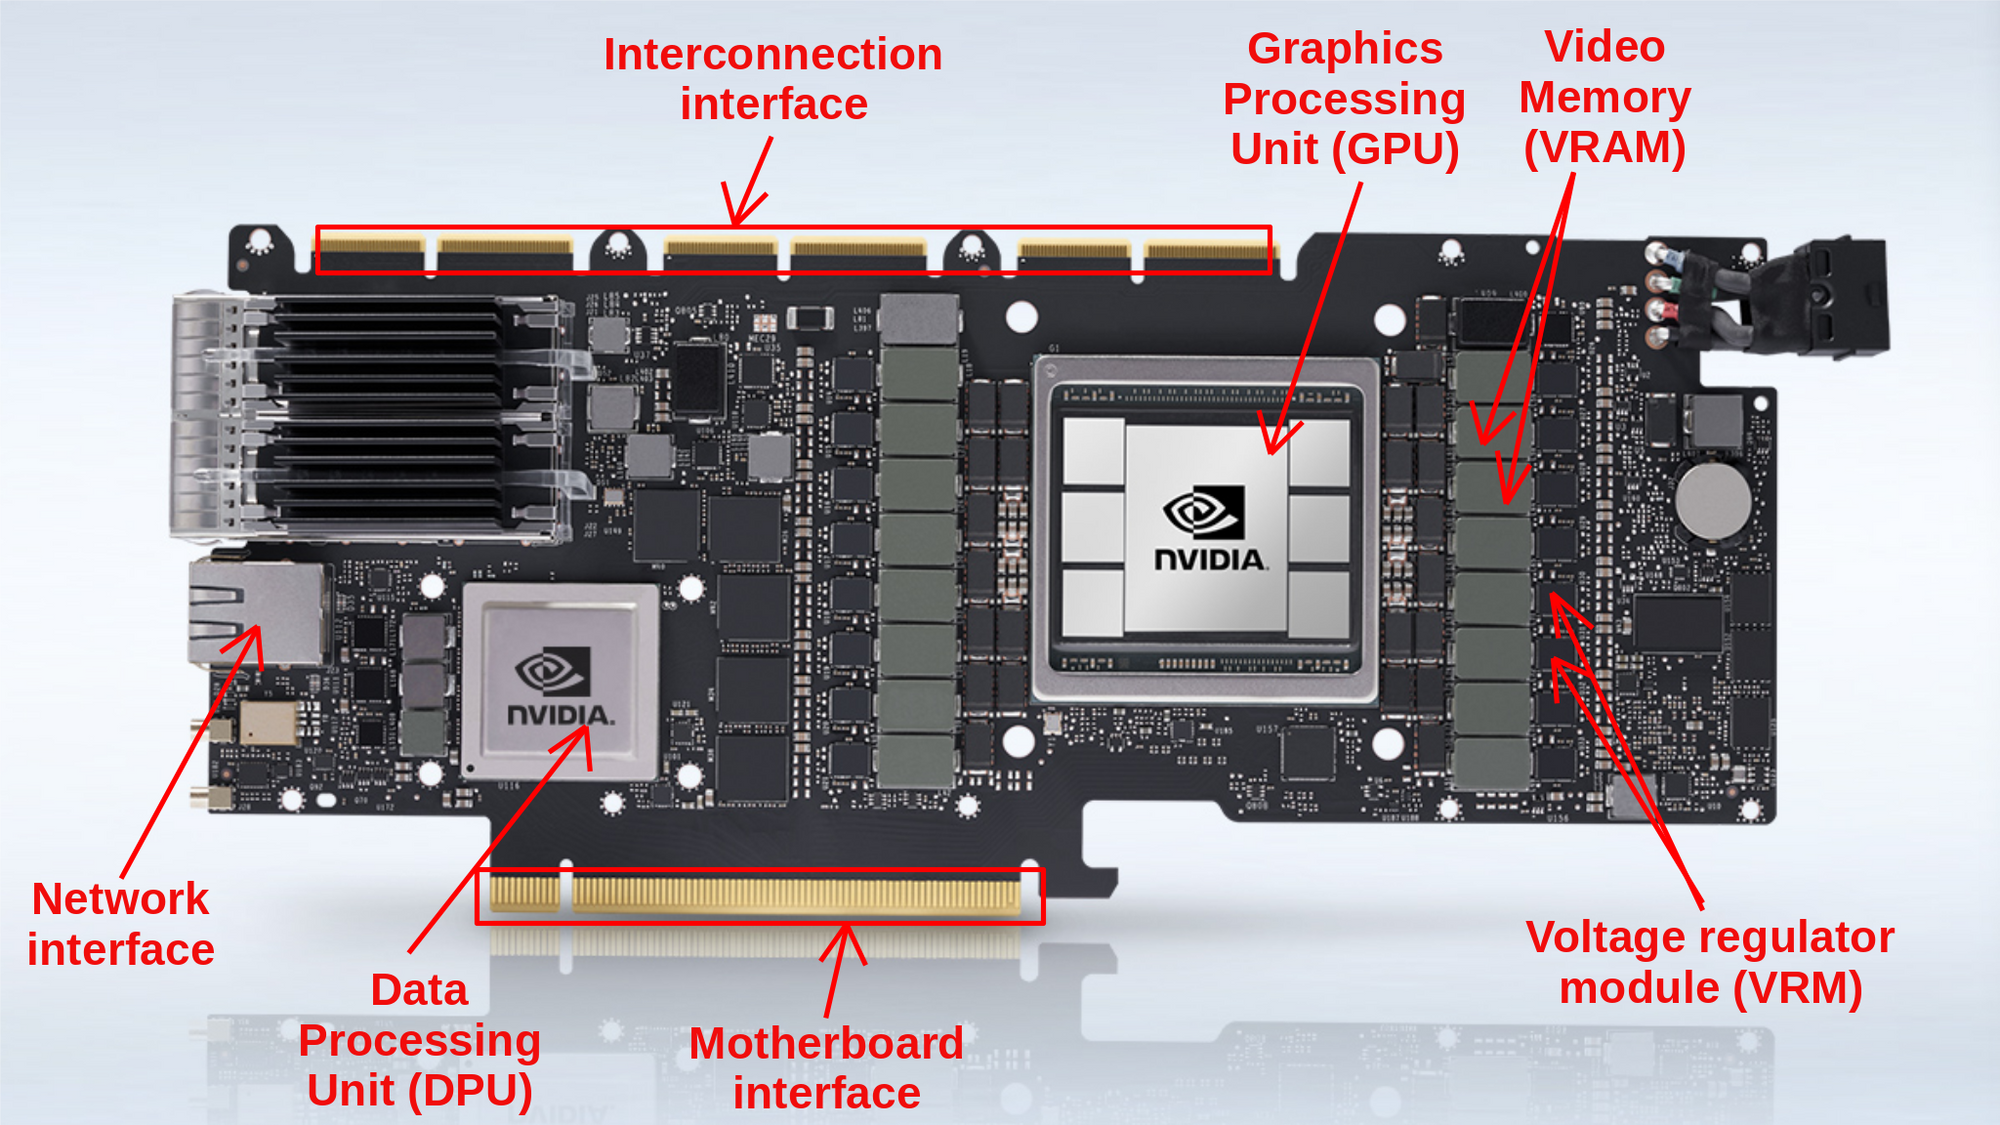 Abnorm udtrykkeligt Slagskib A complete anatomy of a graphics card: Case study of the NVIDIA A100